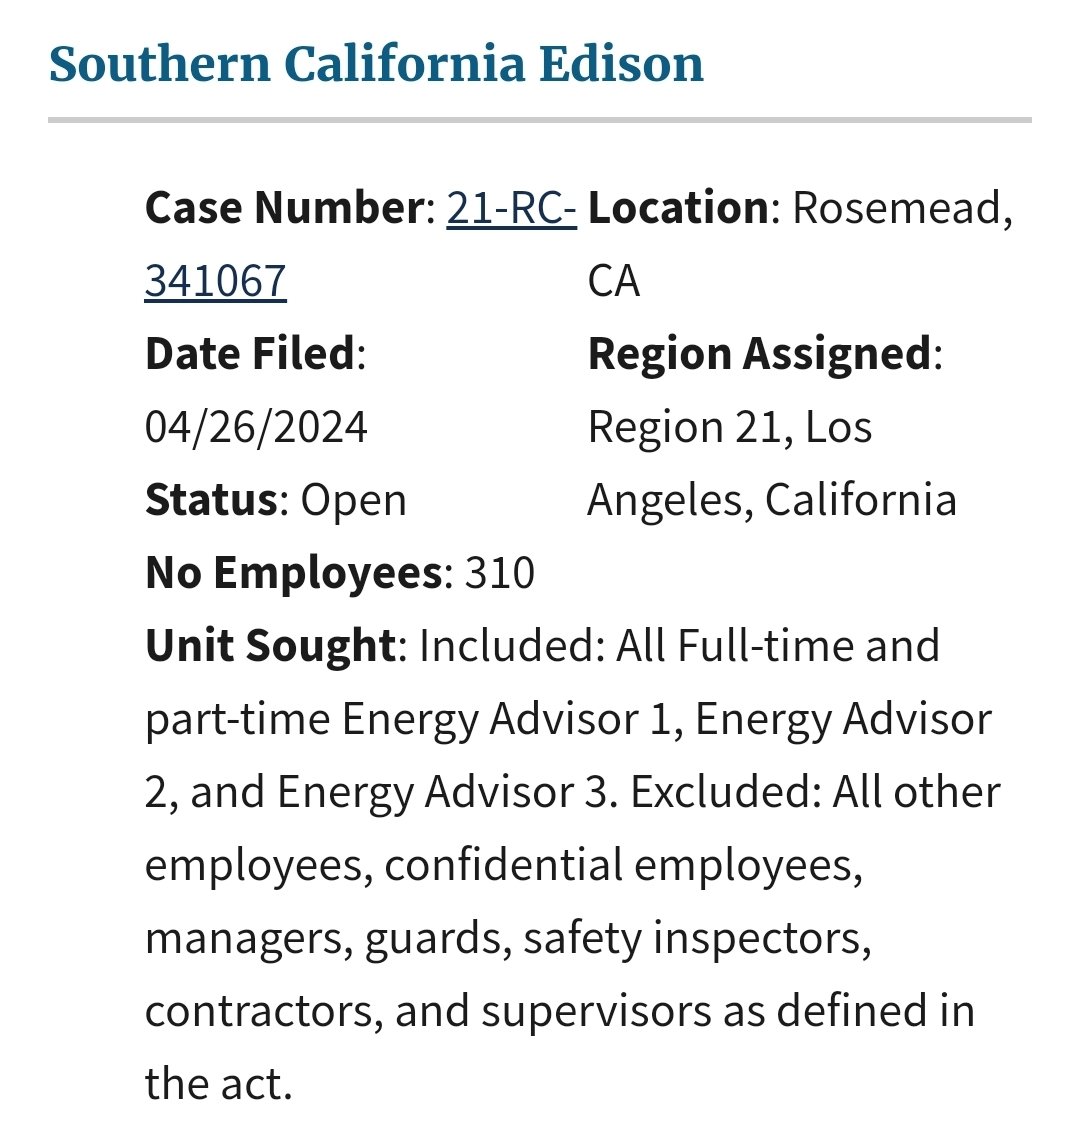 NEW: 310 Utility workers at Southern California Edison are unionizing with @IBEW.